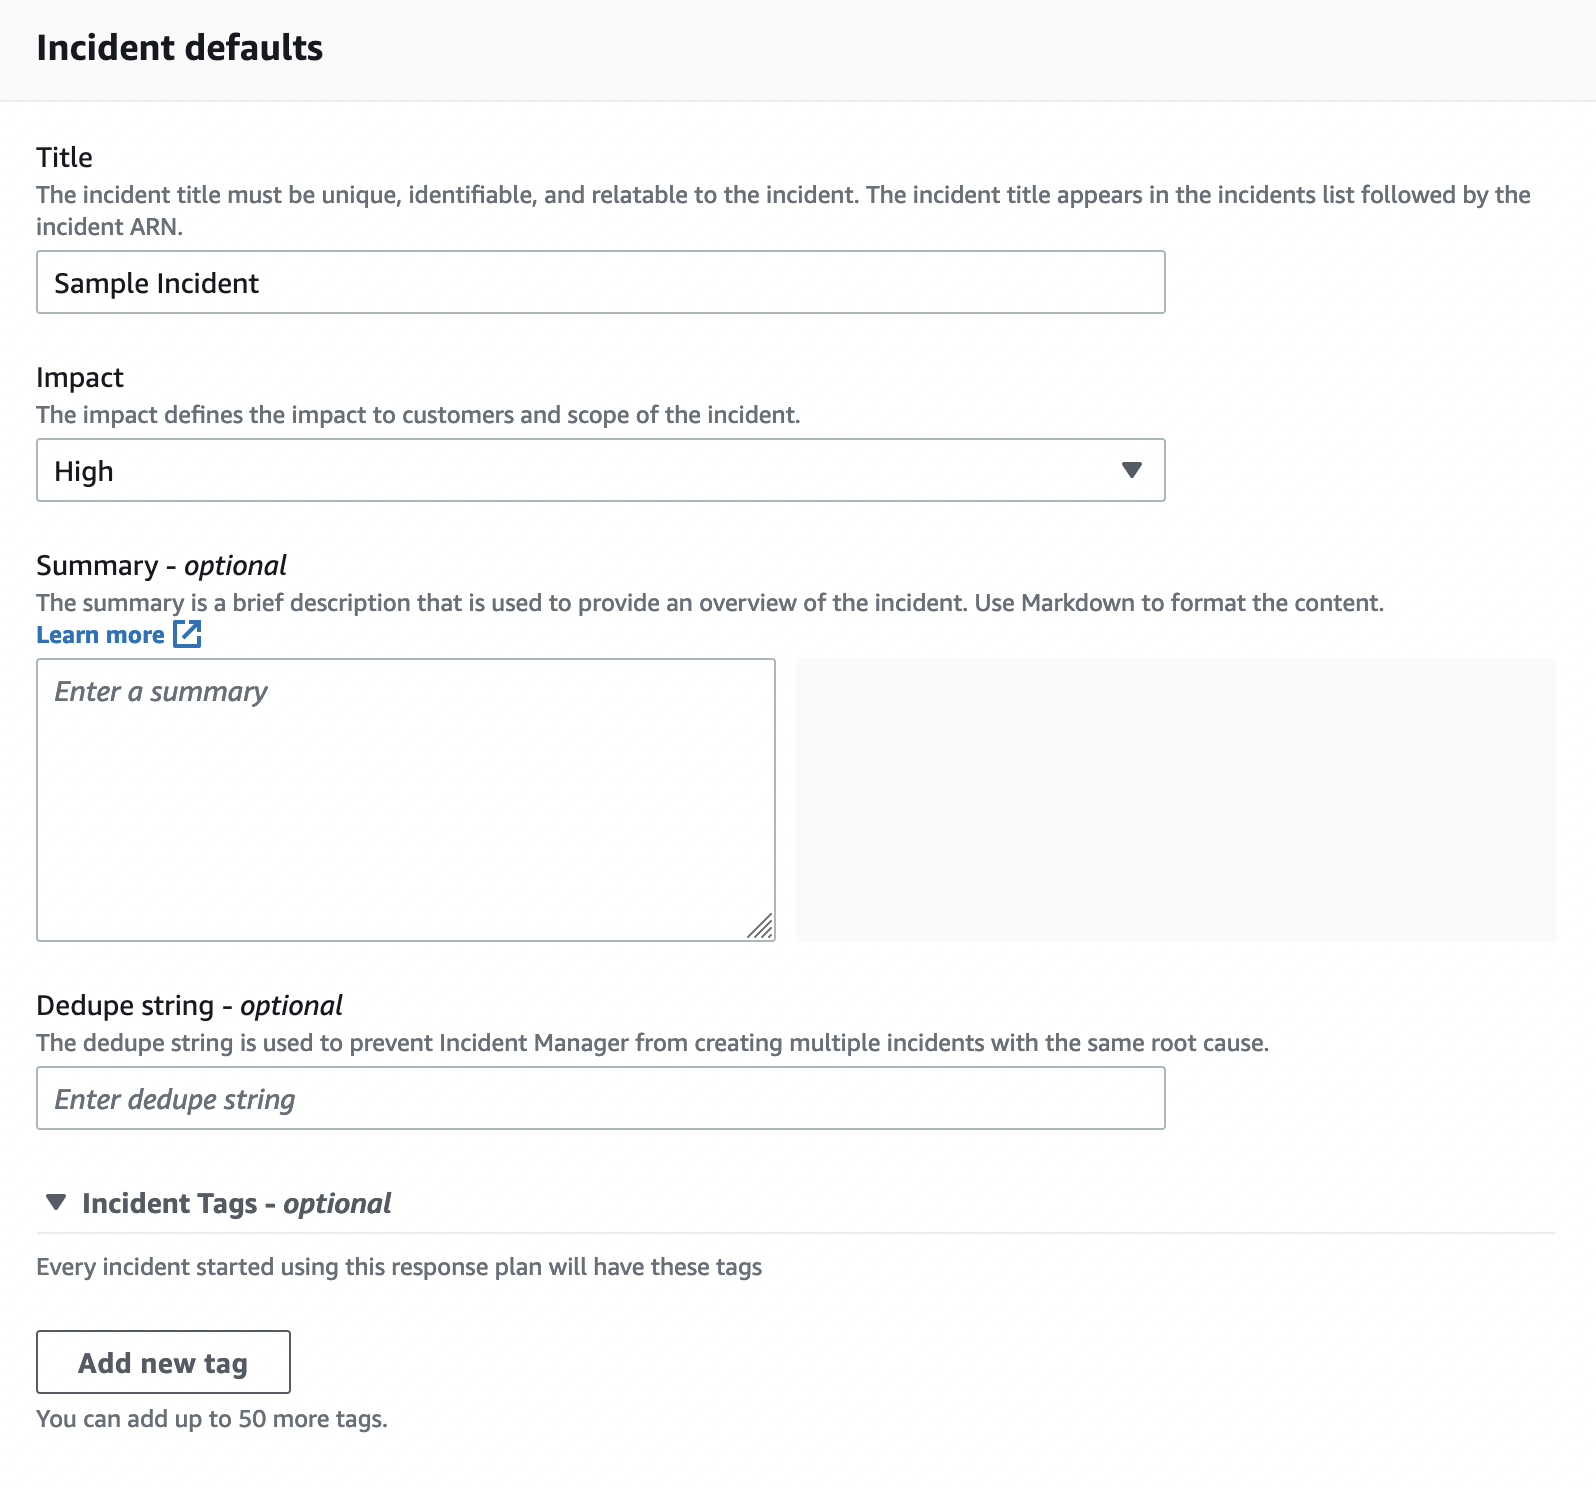 AWS Incident Manager Incident Defaults